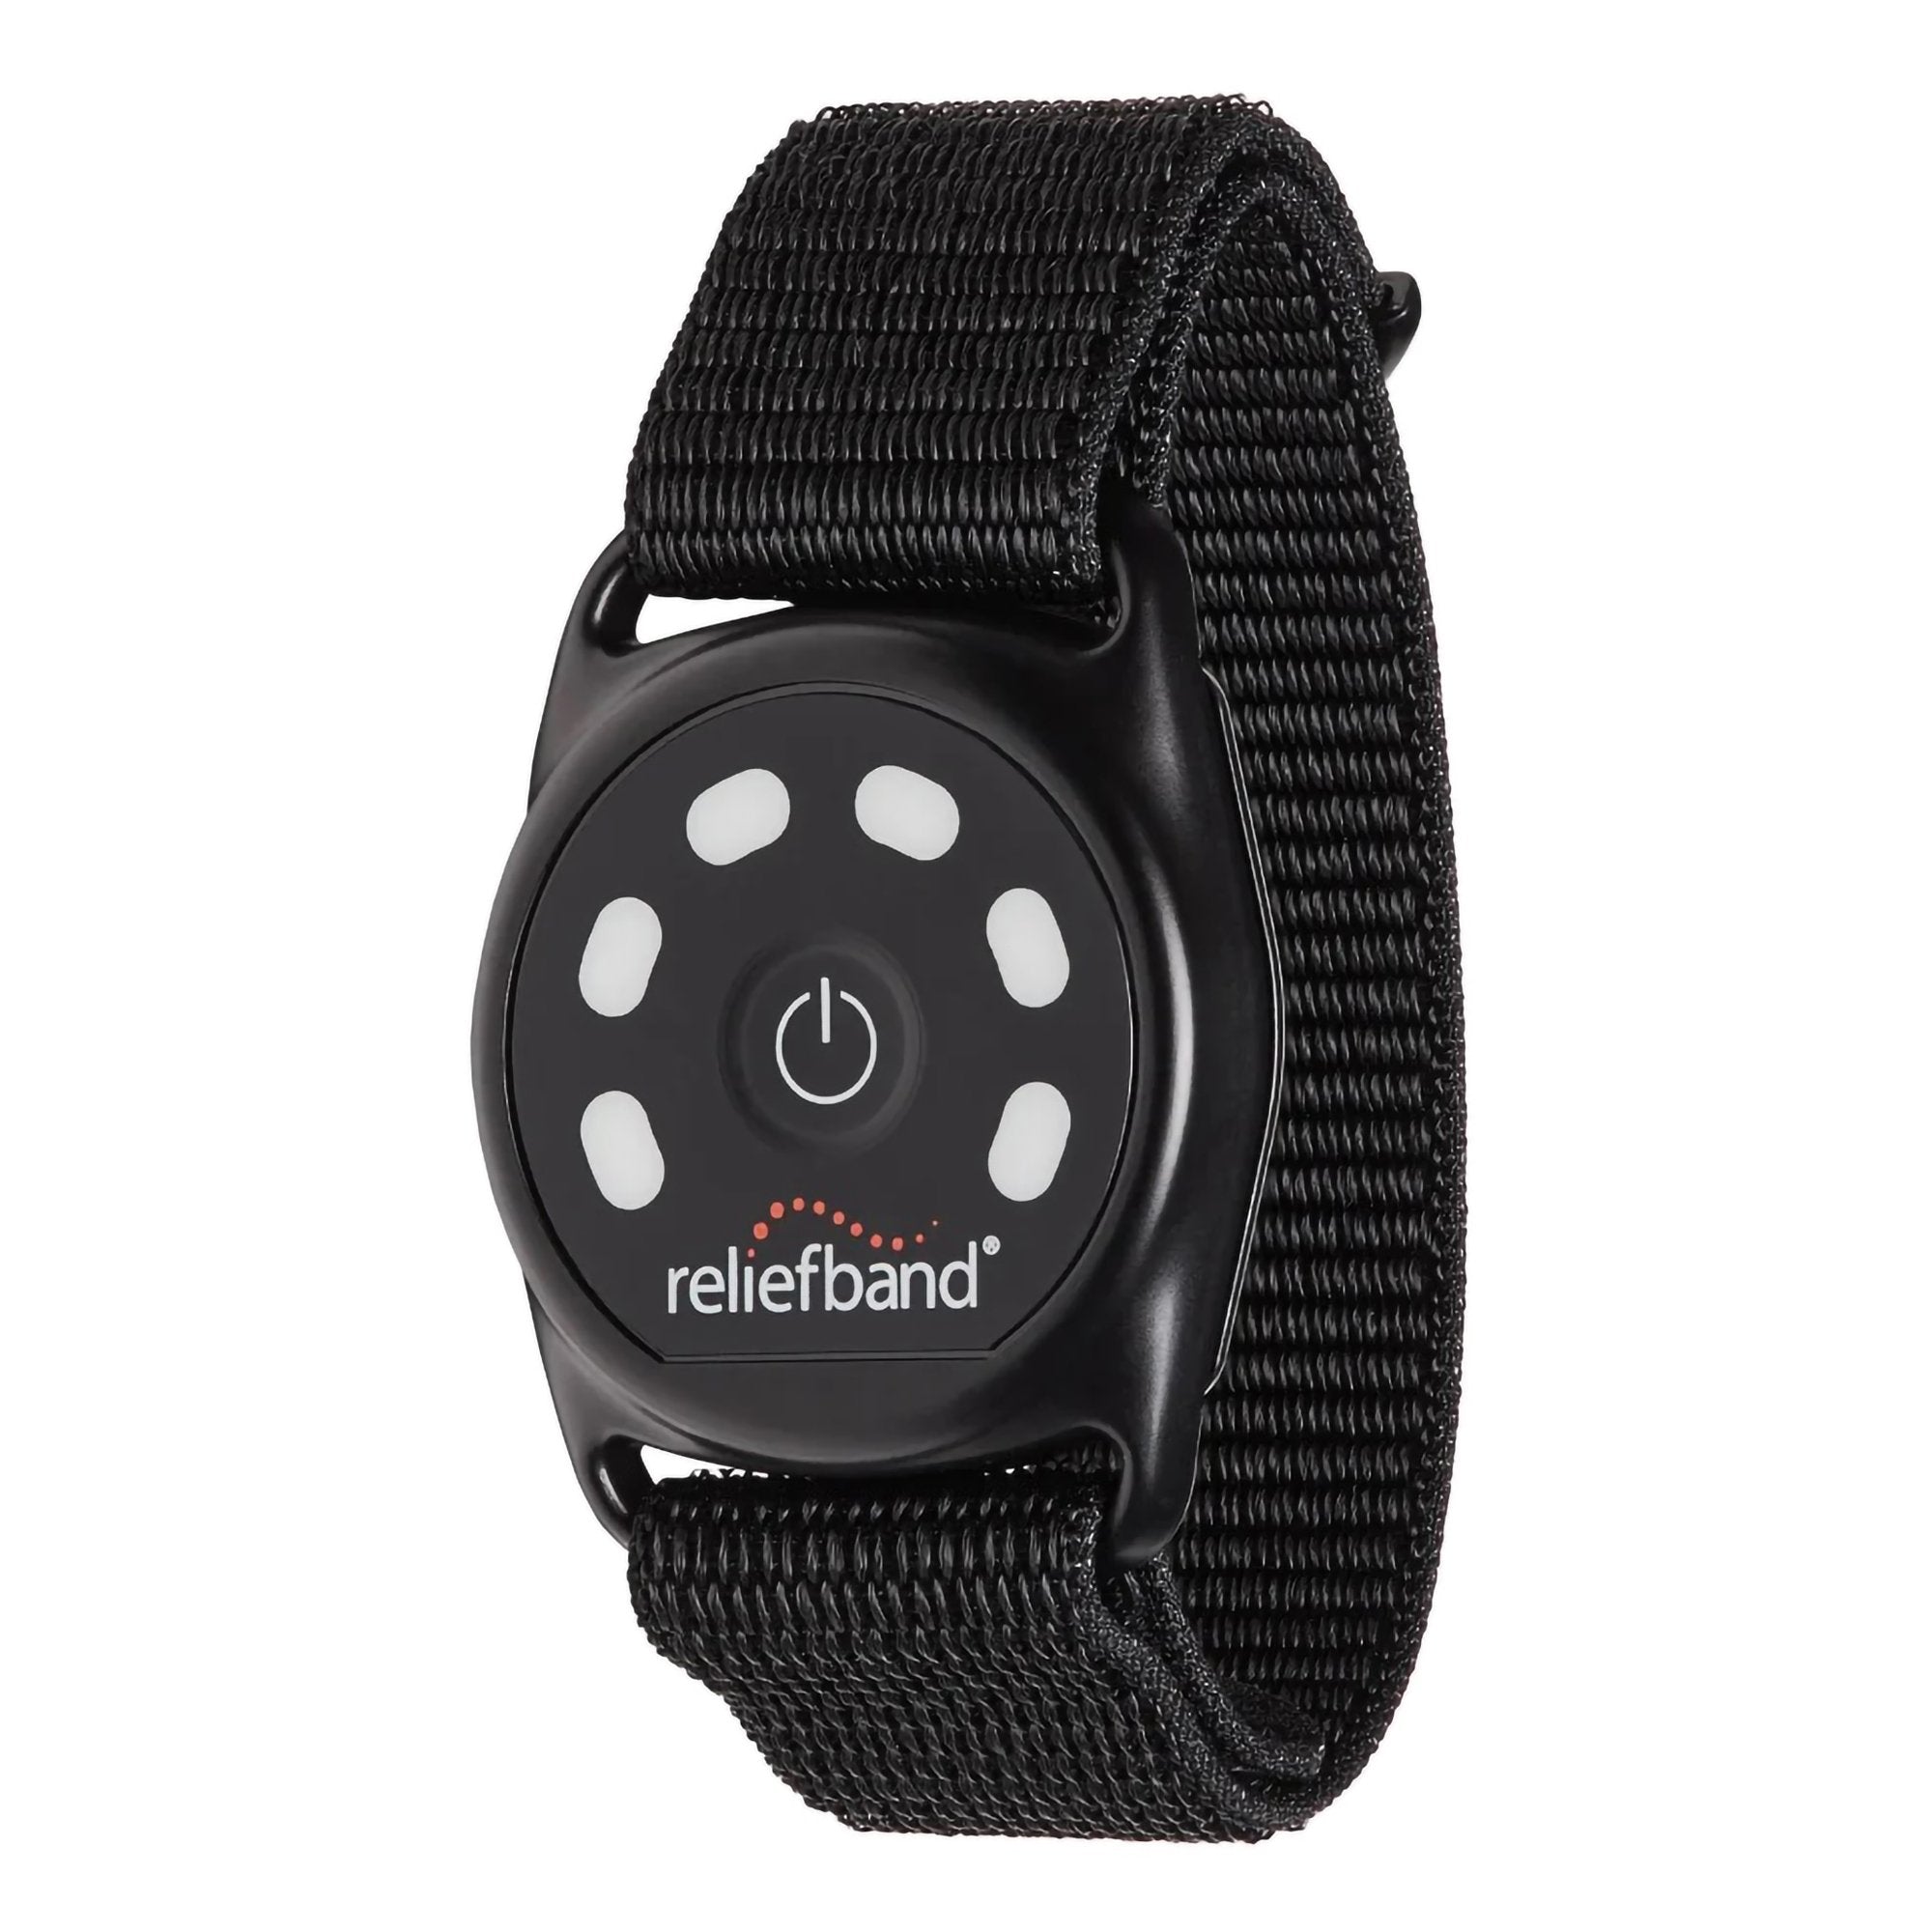 Reliefband® Sport Nausea Relief Wrist Band, Black (24 Units)